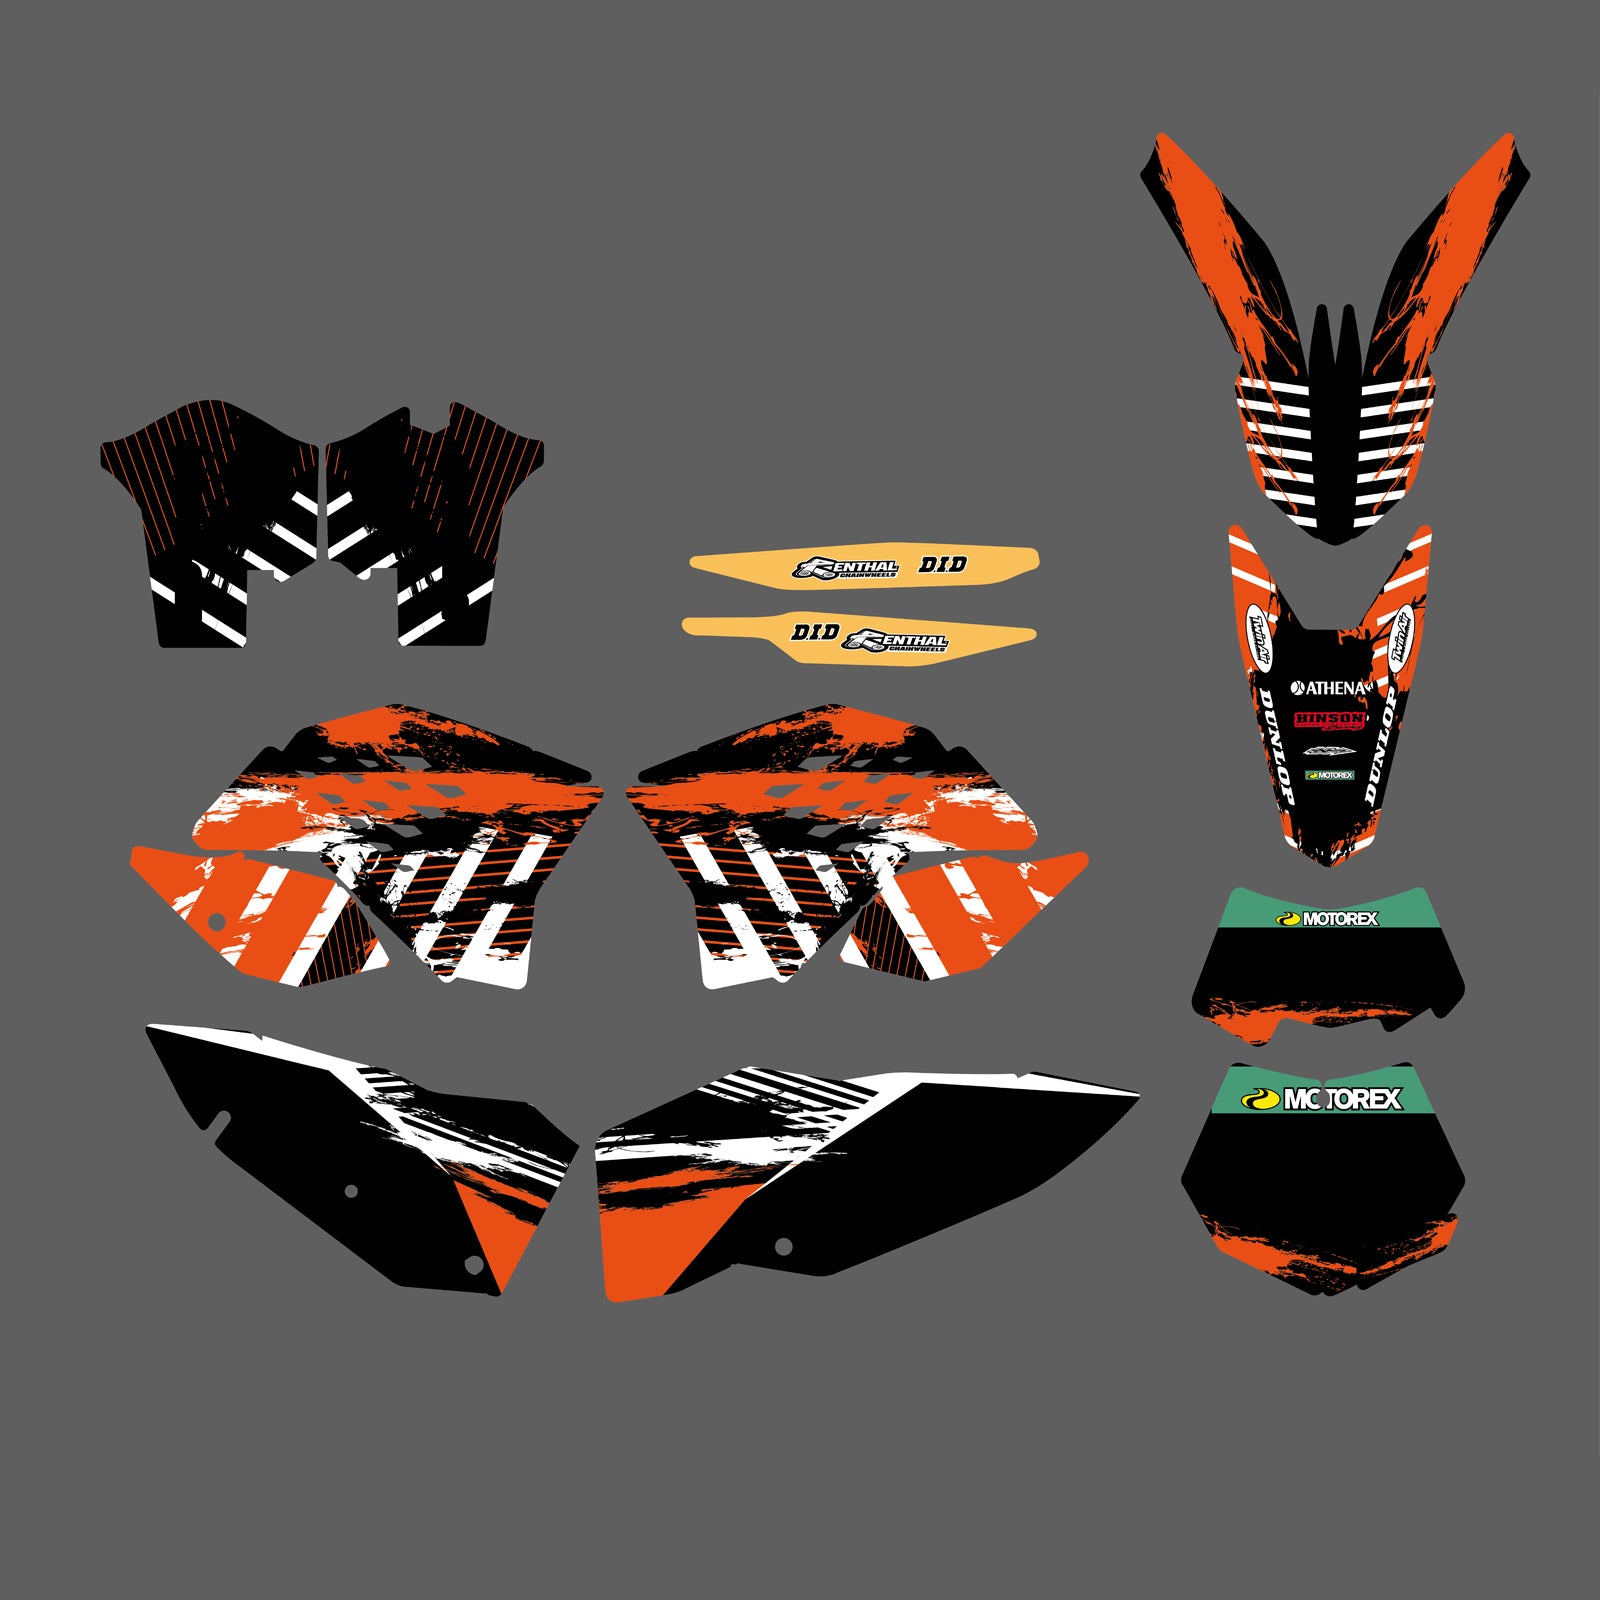 Full Decals Stickers Kits For KTM EXC 2008-2011